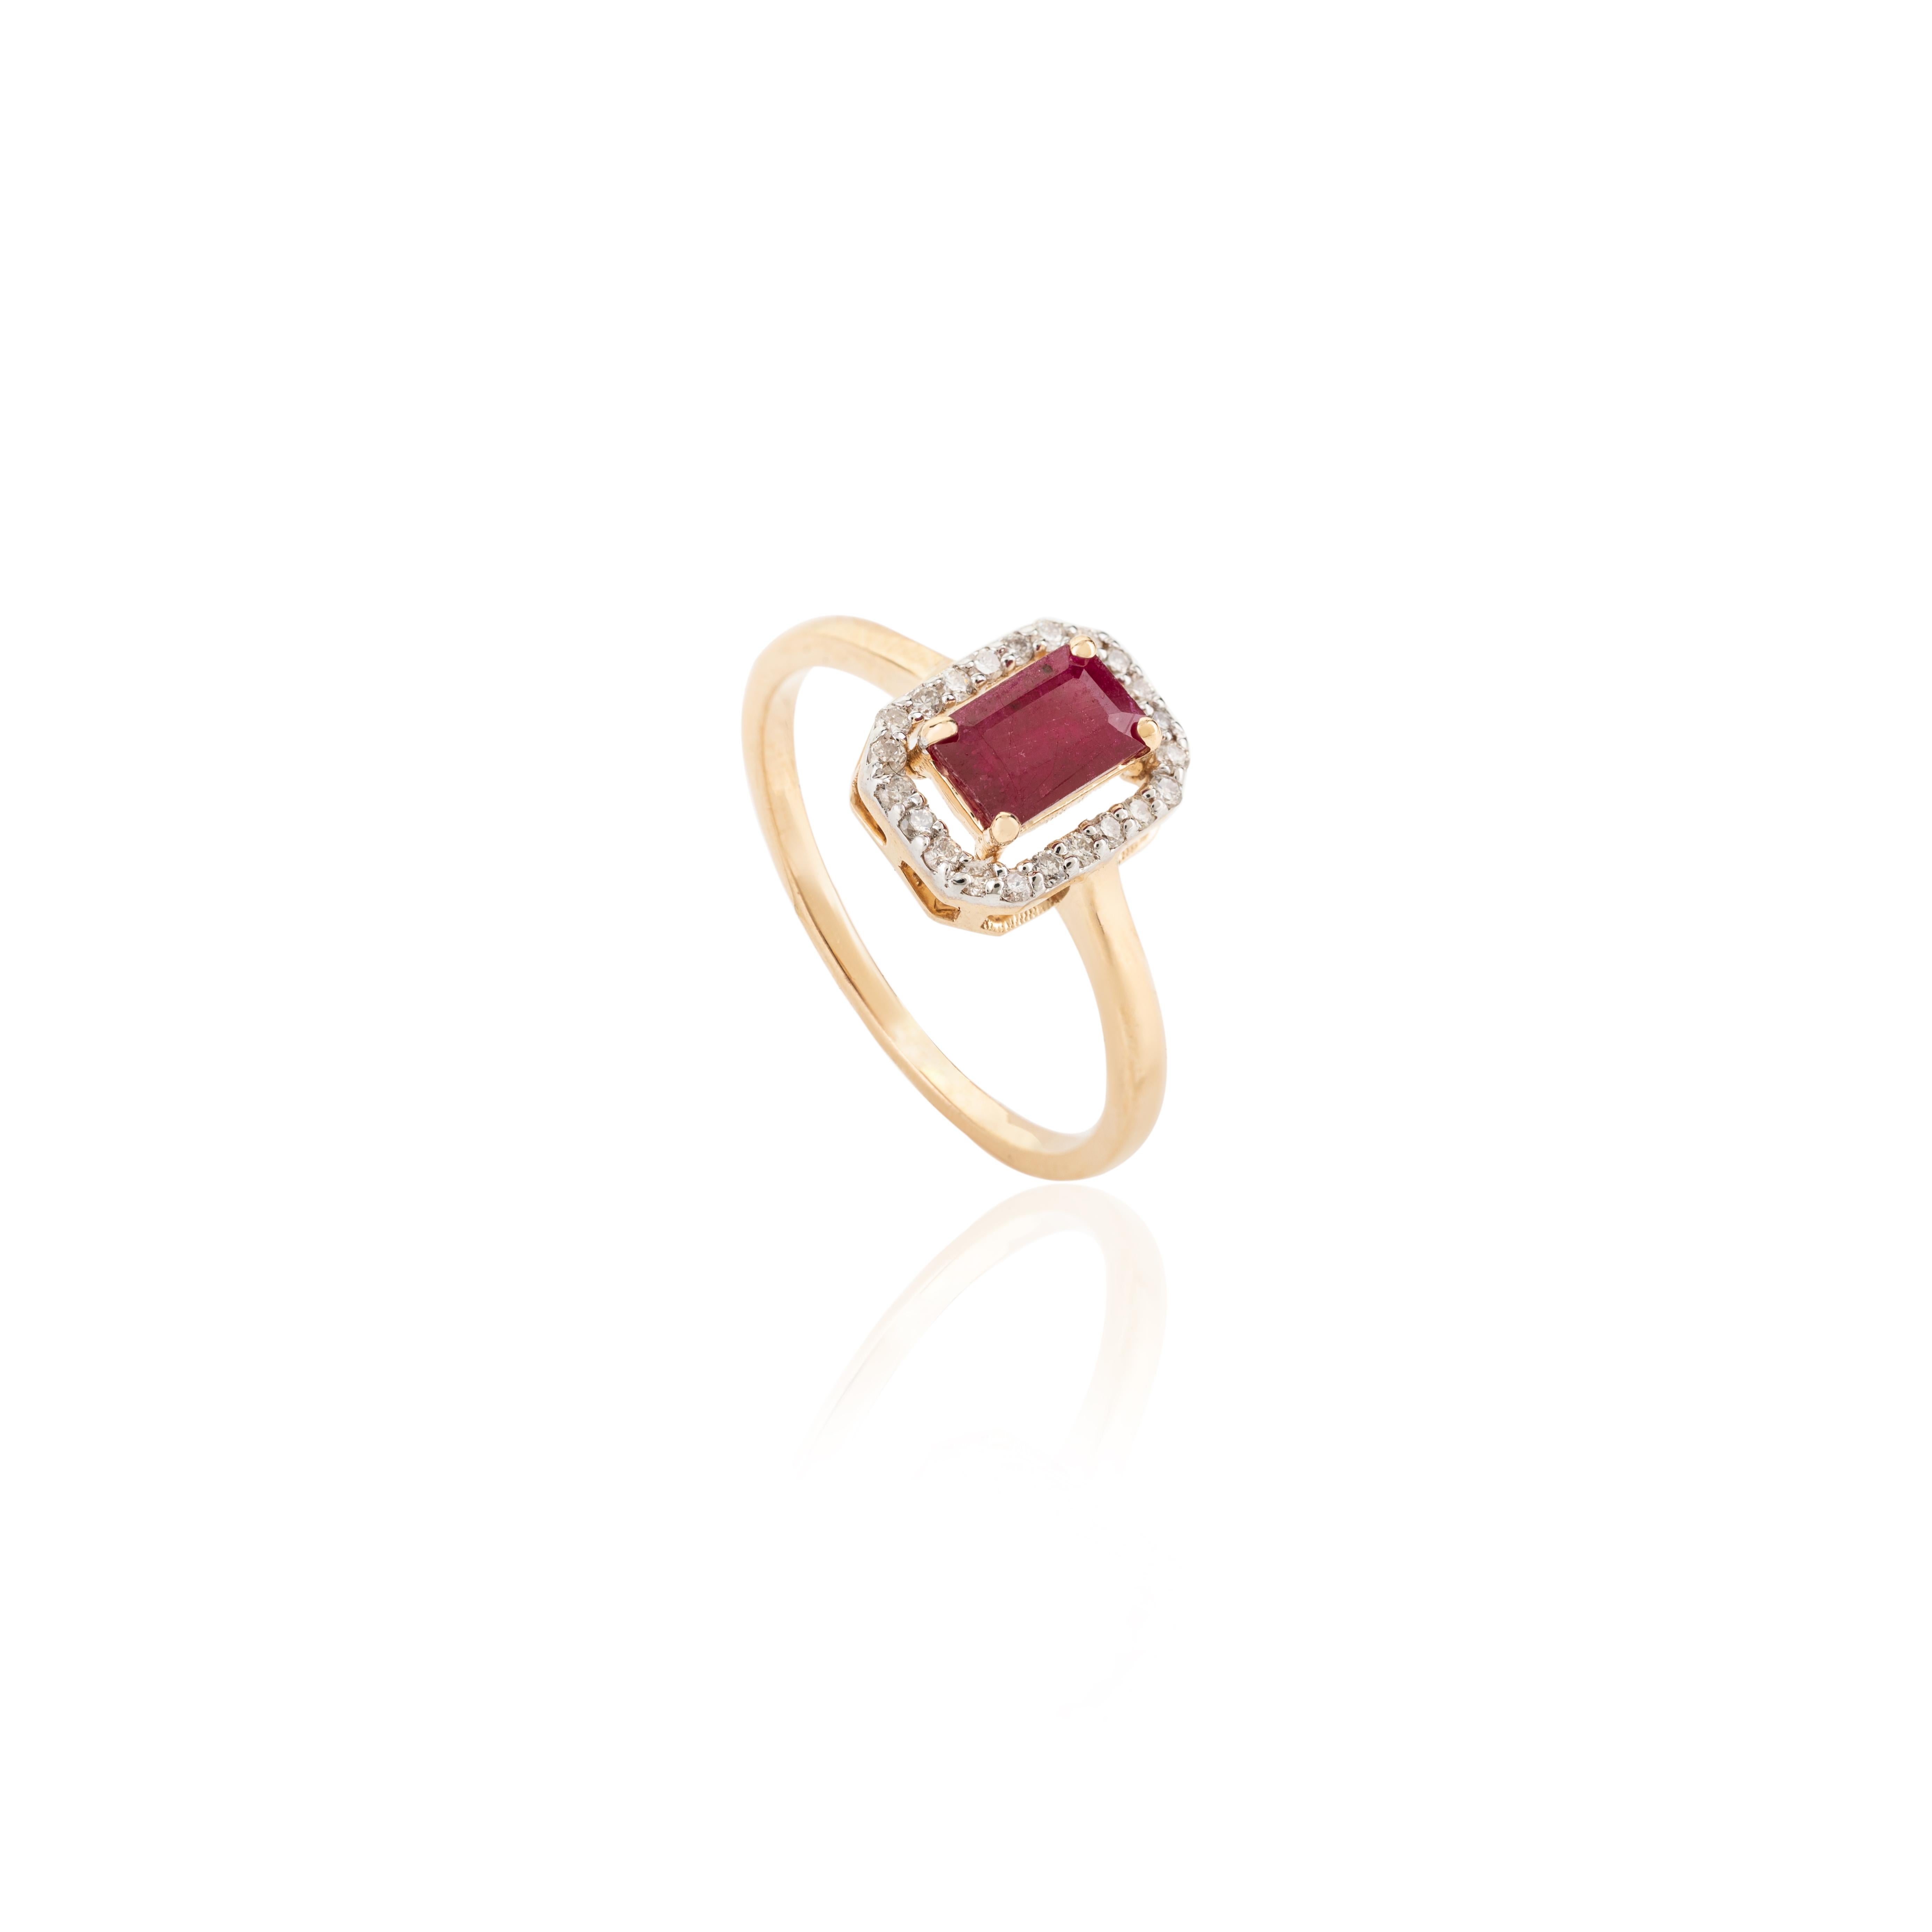 For Sale:  18k Yellow Gold Genuine Ruby Diamond Halo Anniversary Ring Gift for Women 3